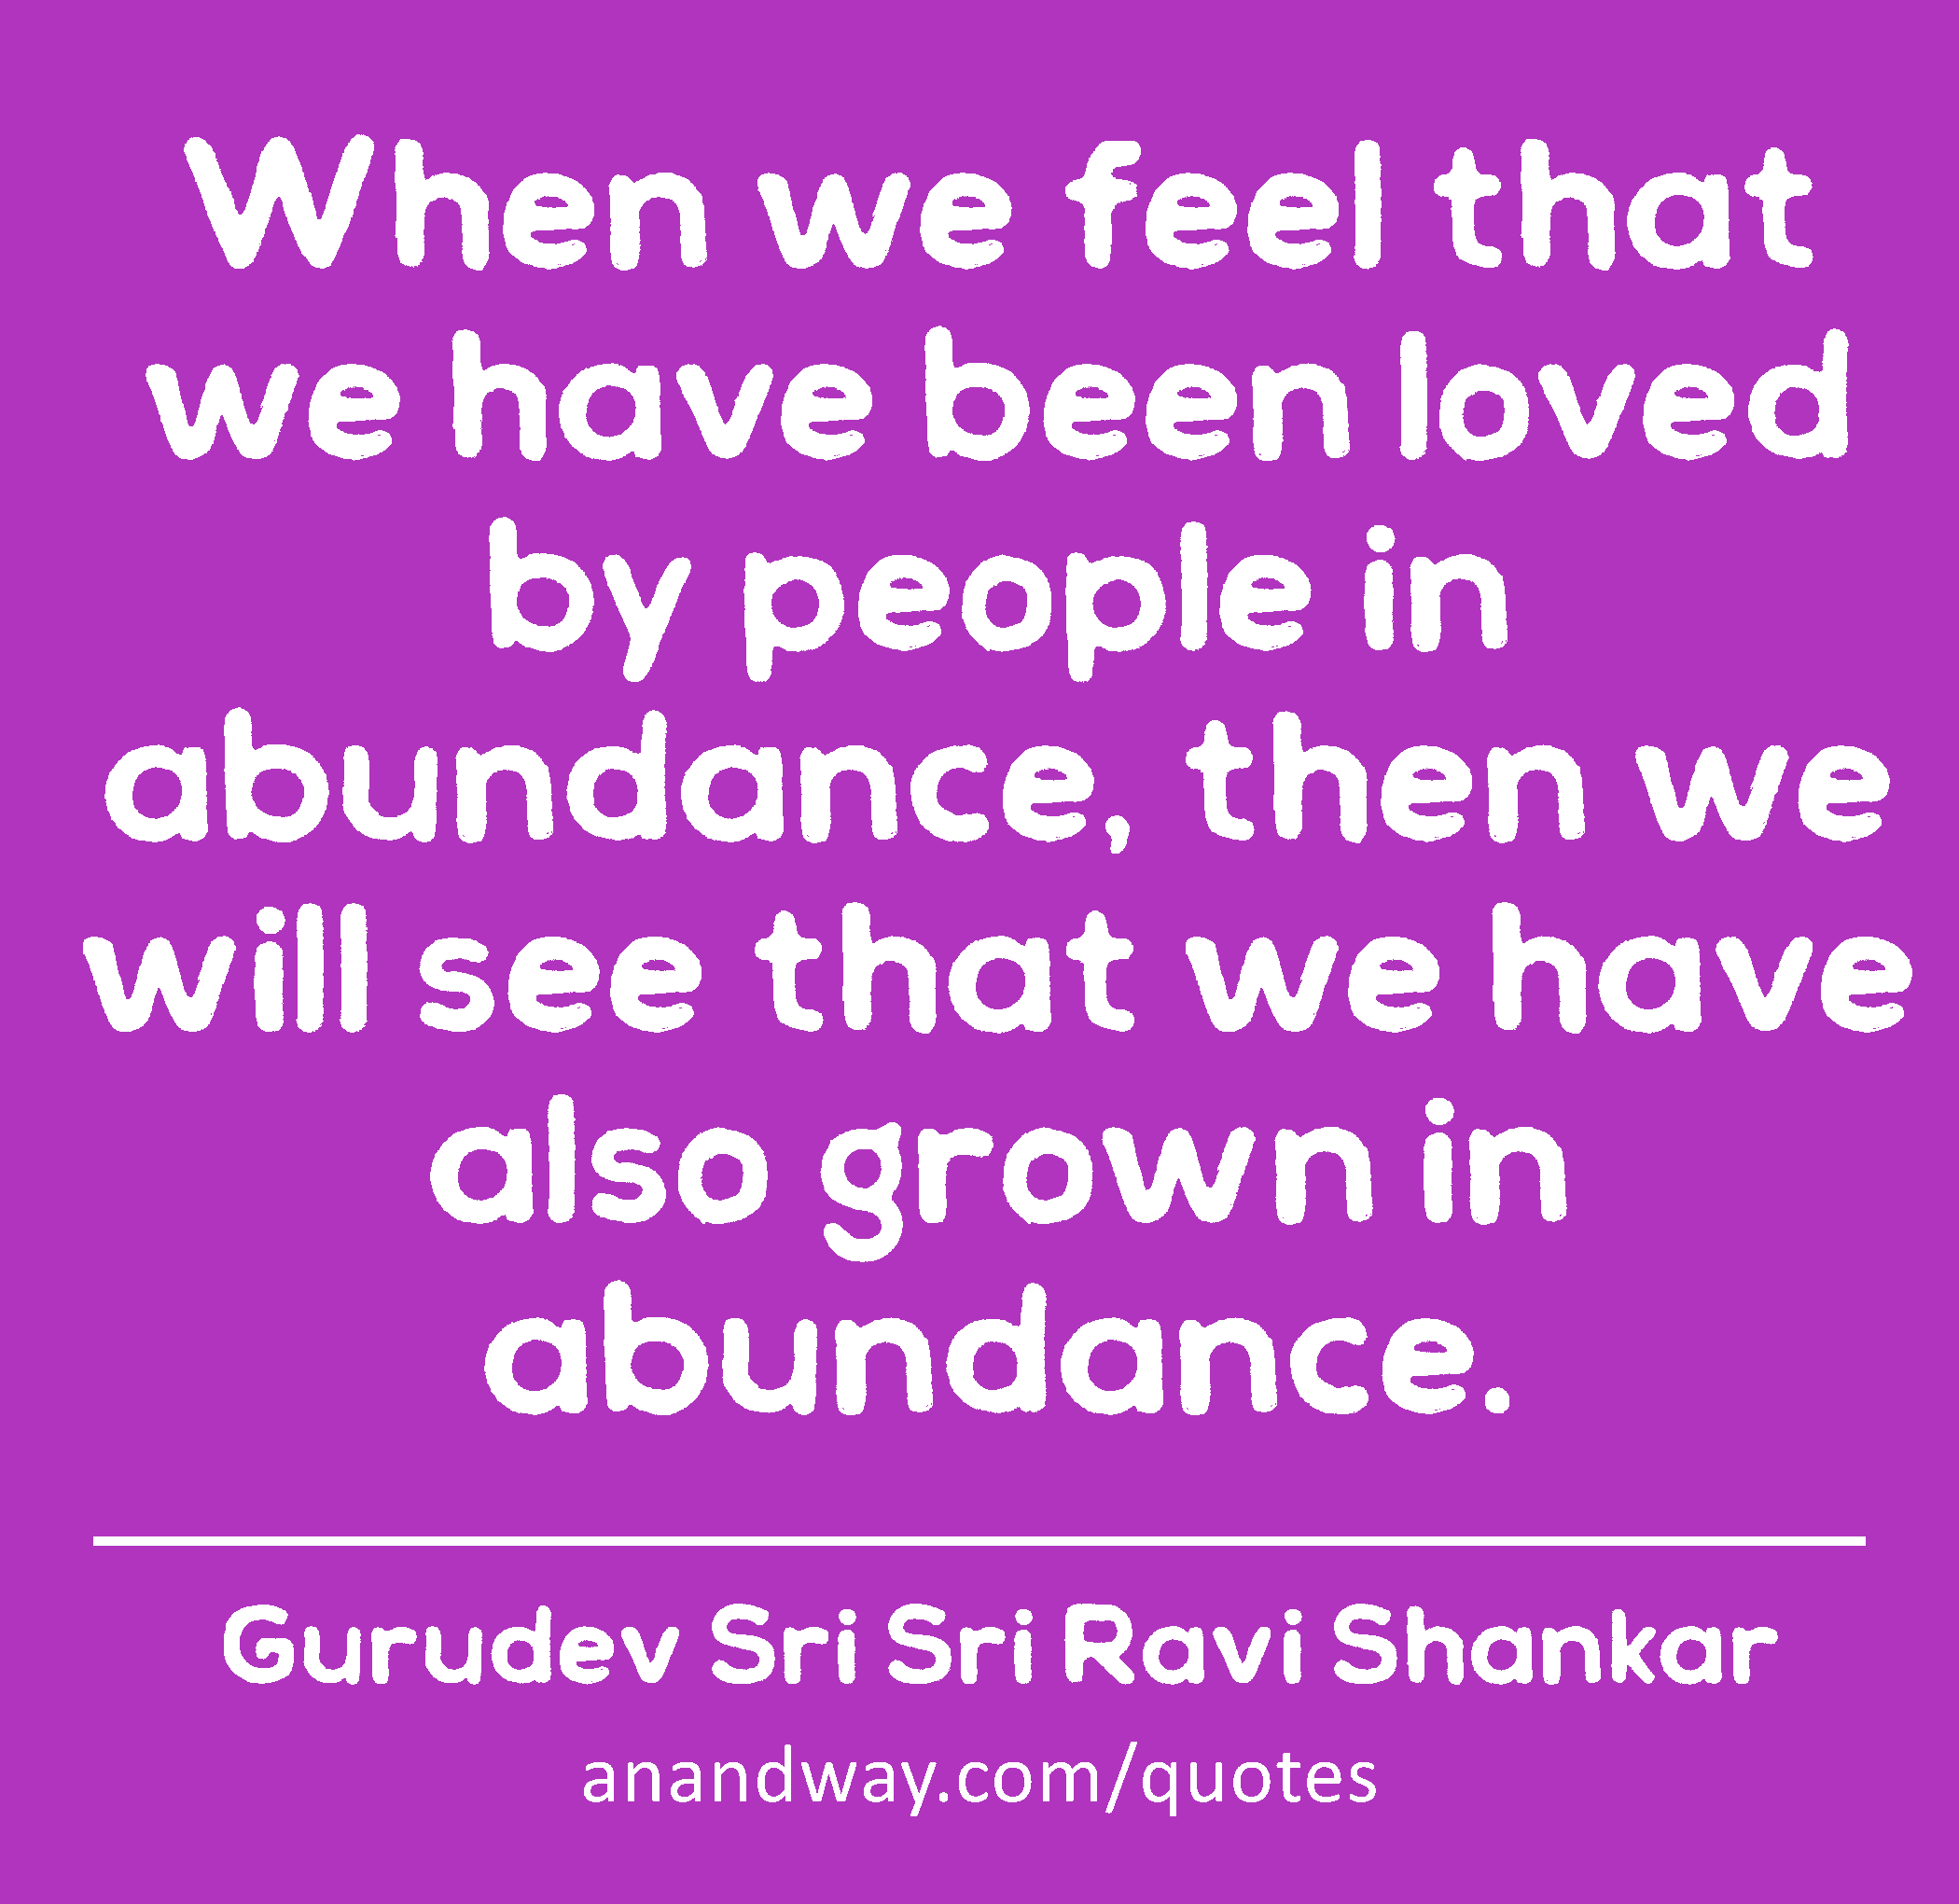 When we feel that we have been loved by people in abundance, then we will see that we have also
 -Gurudev Sri Sri Ravi Shankar